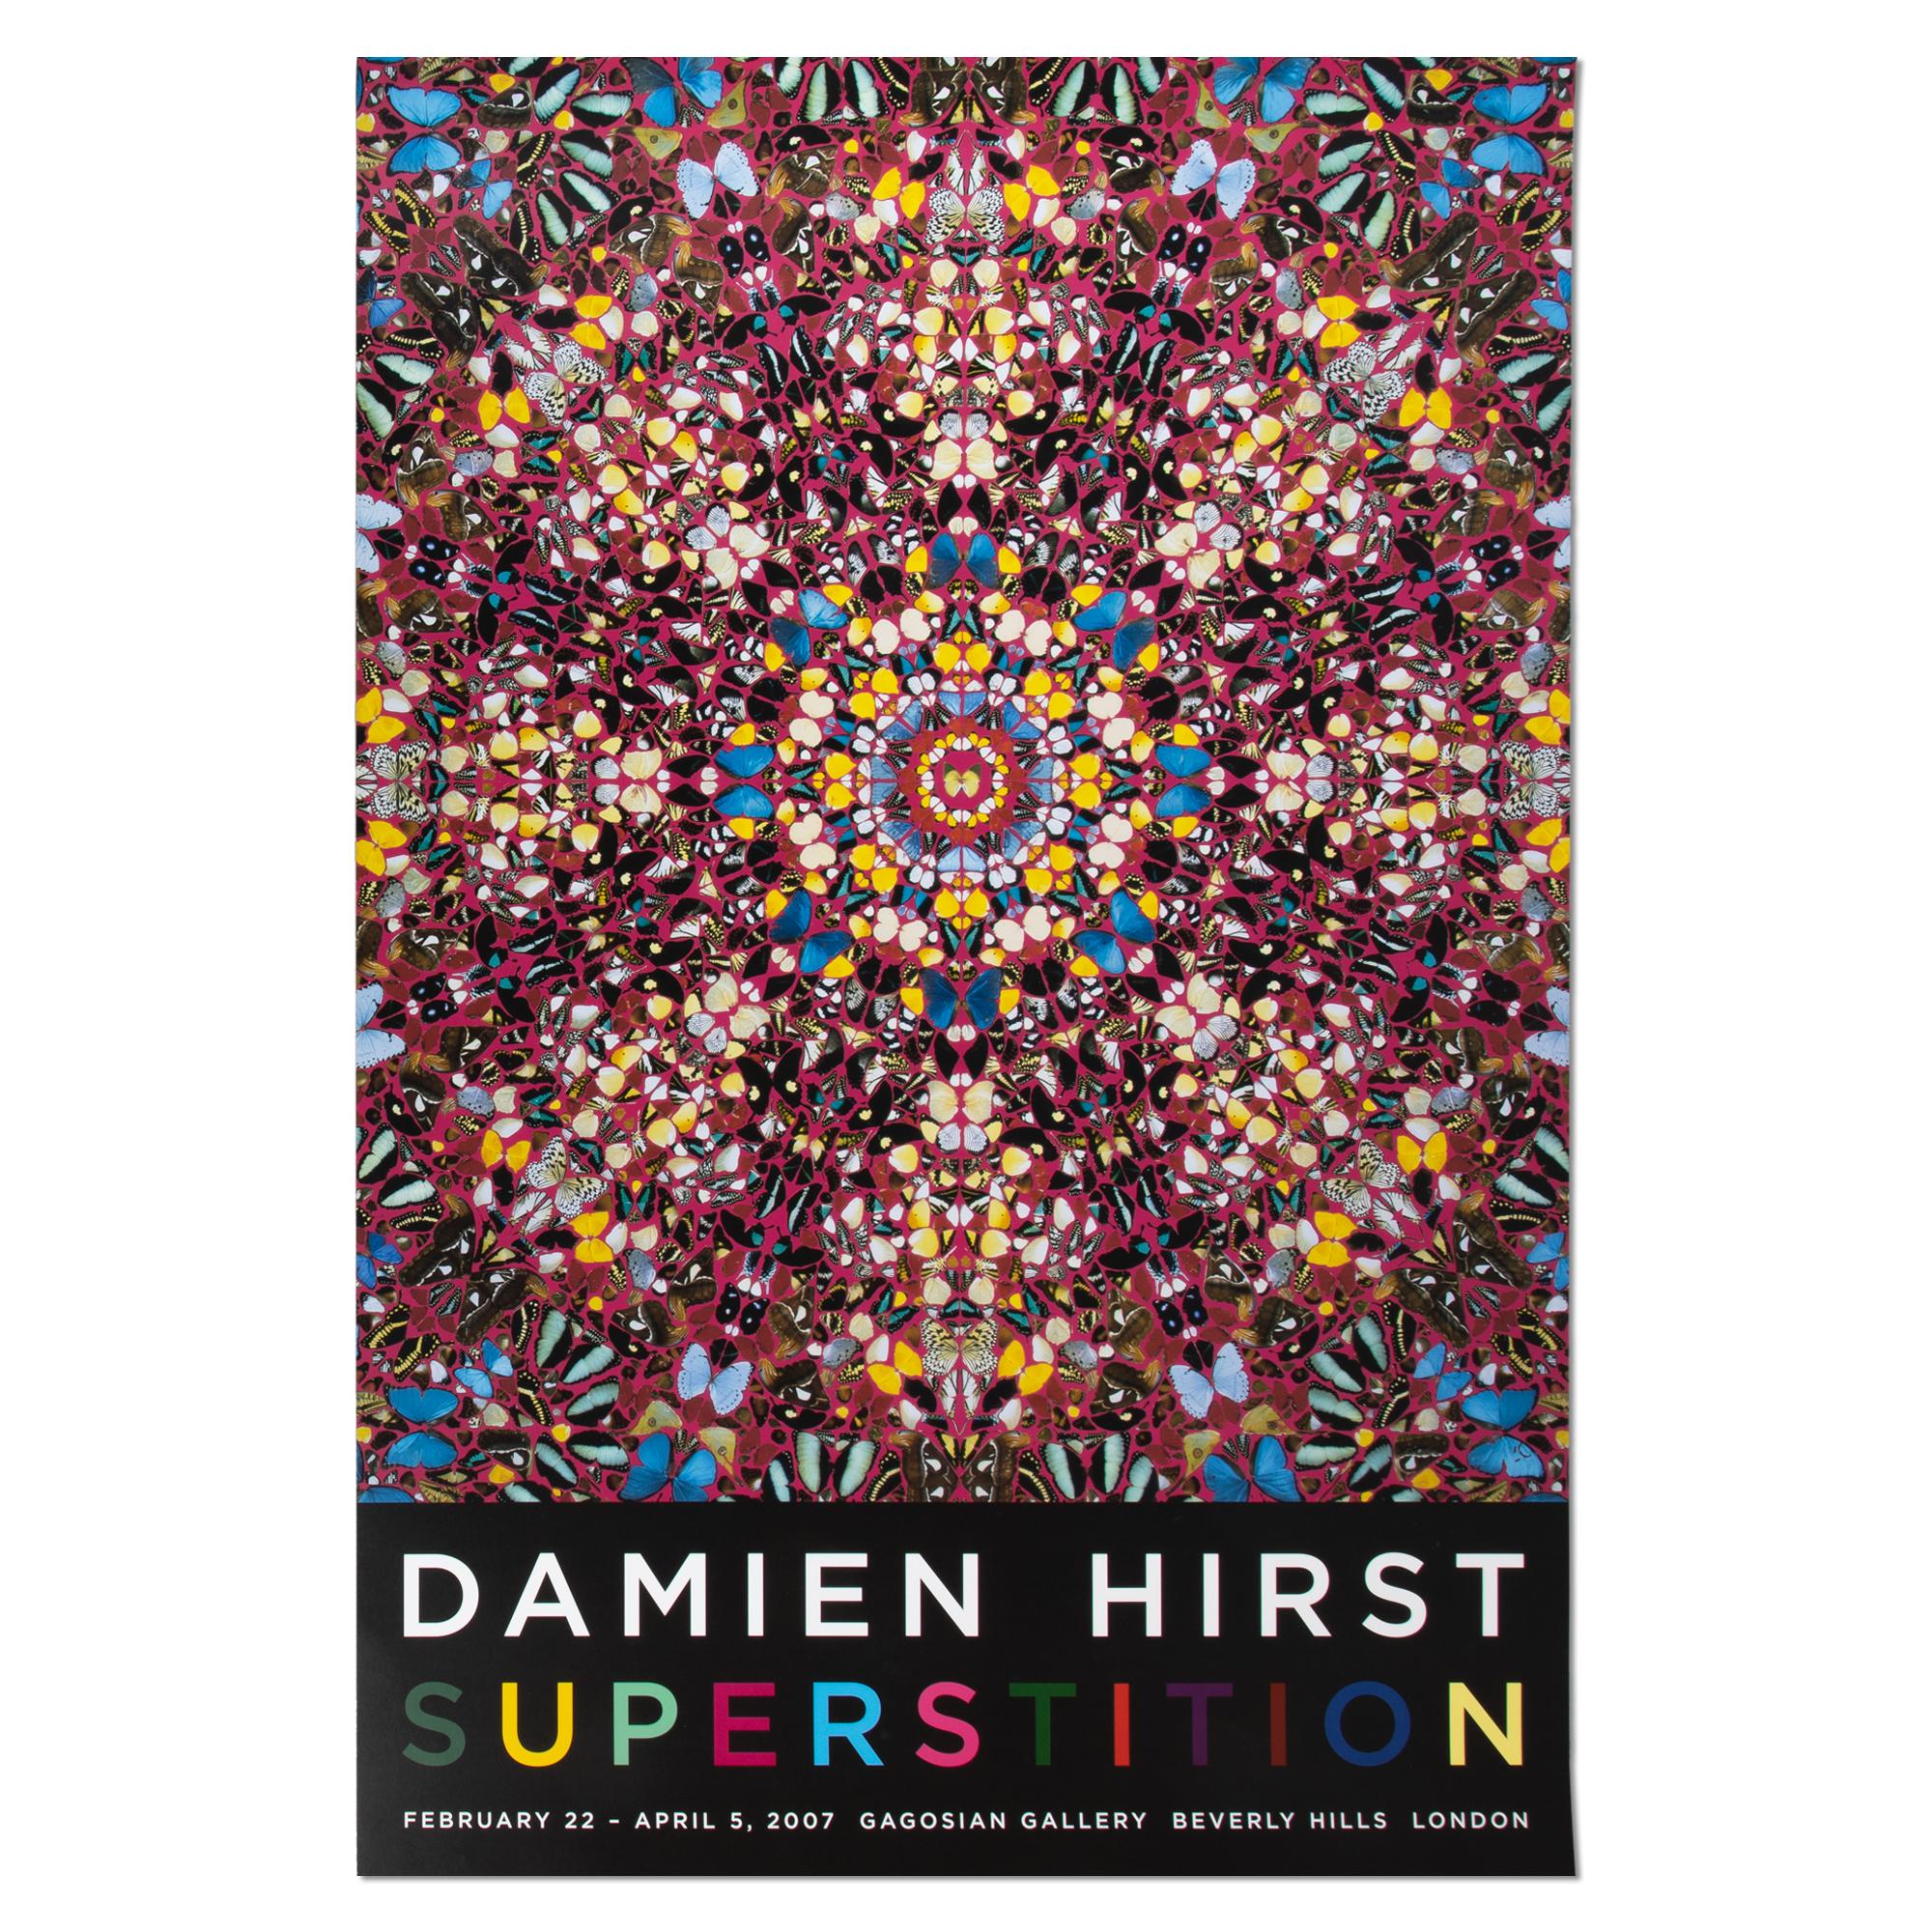 Original exhibition poster by Damien Hirst from 2007. The exhibition took place at Gagosian, Davies Street, London, and Gagosian, Beverly Hills. 

Damien Hirst (British, b. 1965)
Damien Hirst Superstition, 2007
Medium: Exhibition poster (offset